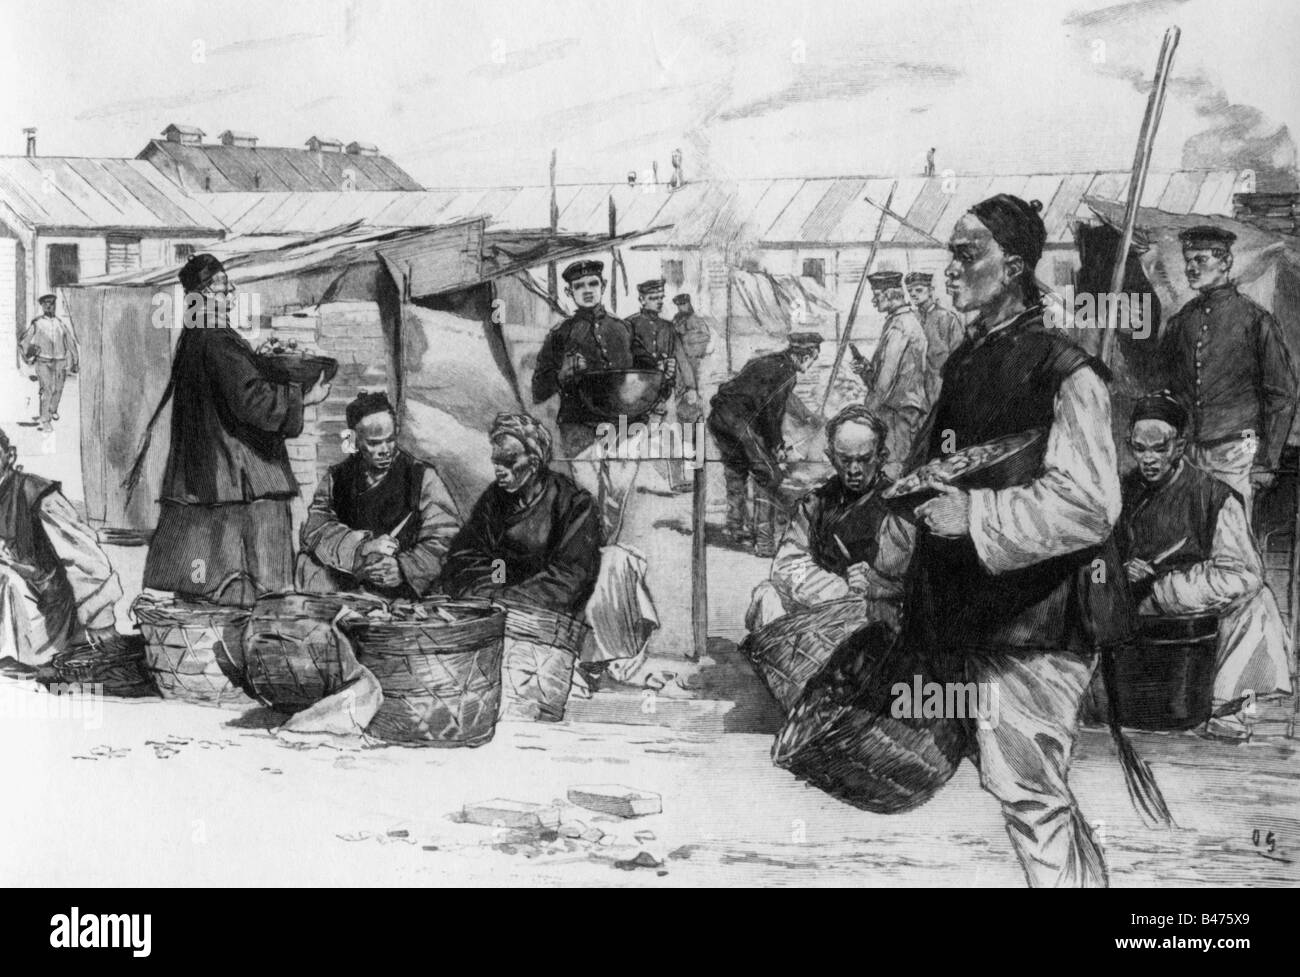 geography / travel, China, politics, German camp in Tianjin, drawing by O. Gerlach, after a photograph, Germany, 1901, Stock Photo